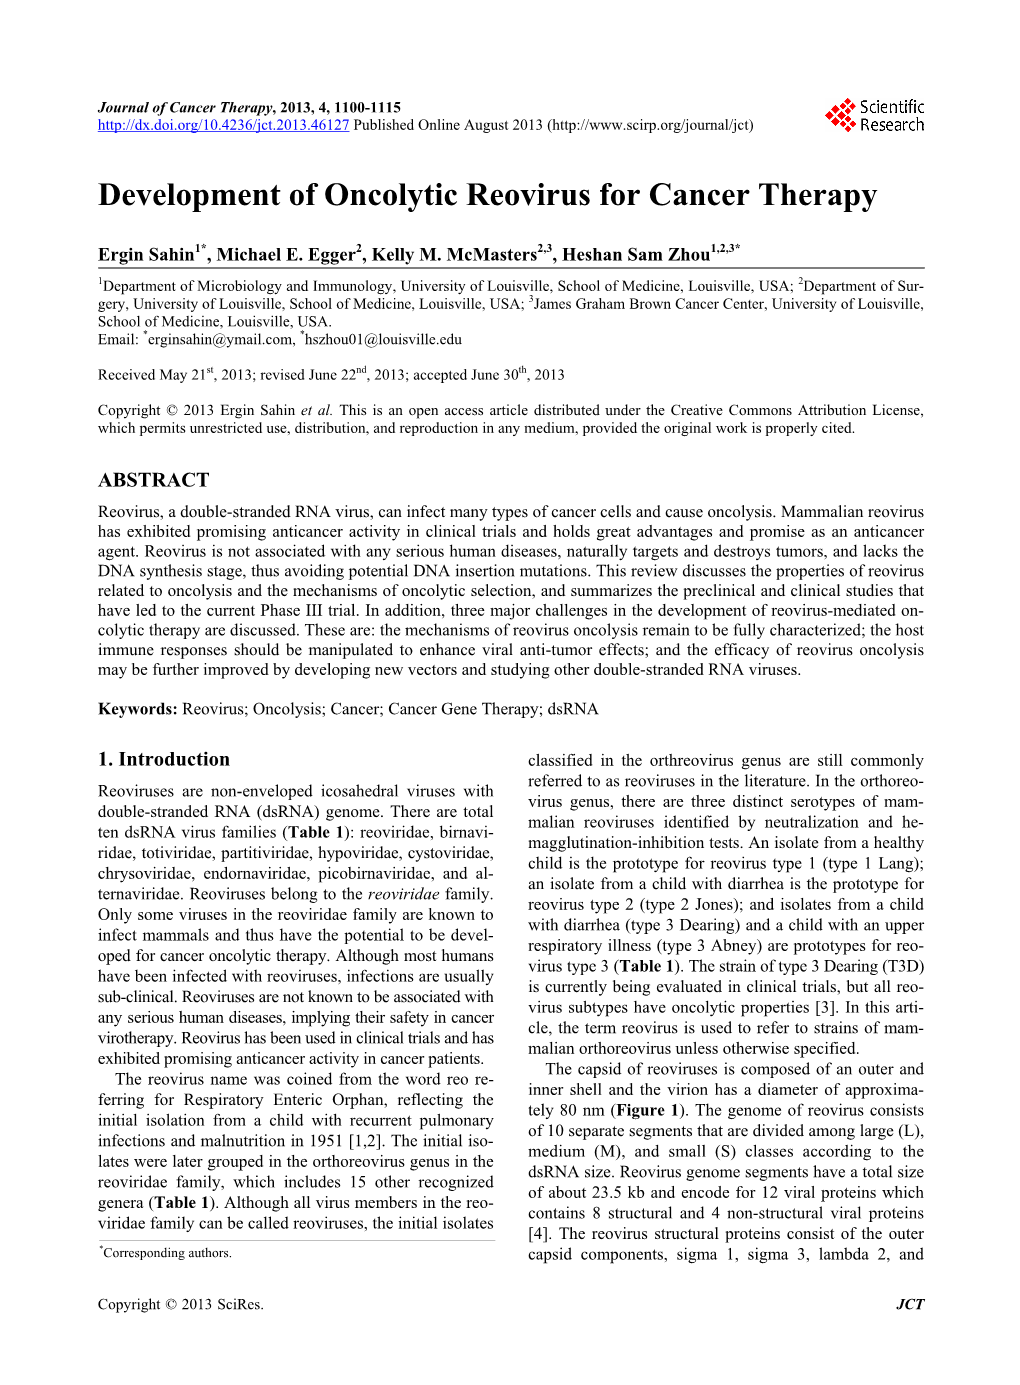 Development of Oncolytic Reovirus for Cancer Therapy